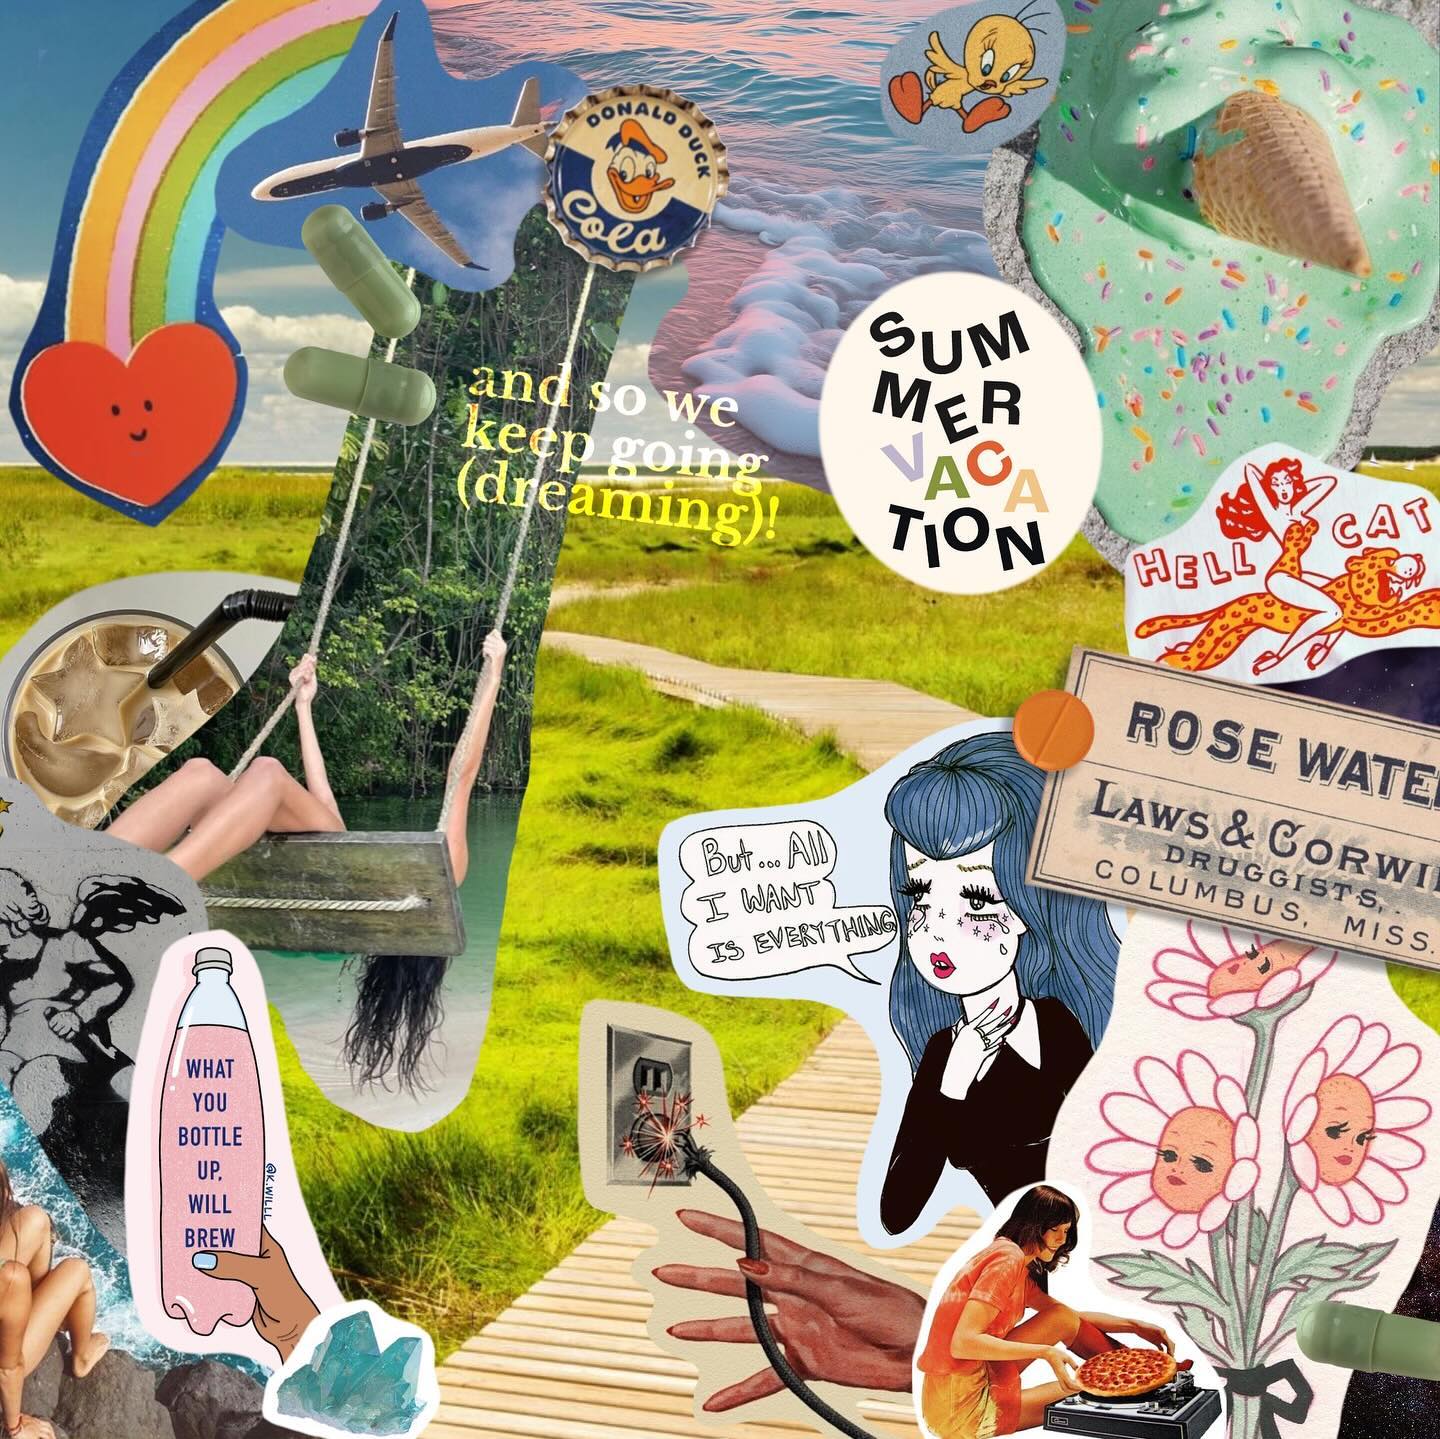 Did someone say summer mood boards?🦩
These are giving me major I-Spy vibes. 🔎 
#MoodBoard 
#moodboards #summermood #summermoodboard #junkjournaling #fyp #digitaljournal #collage #piccollage #collageart #digitalcollage #digitalart #procreate #summertime #manifesting #visionboard #visionboards #digitalvisionboard #summervibes #feelgood #insidemymind #ispy